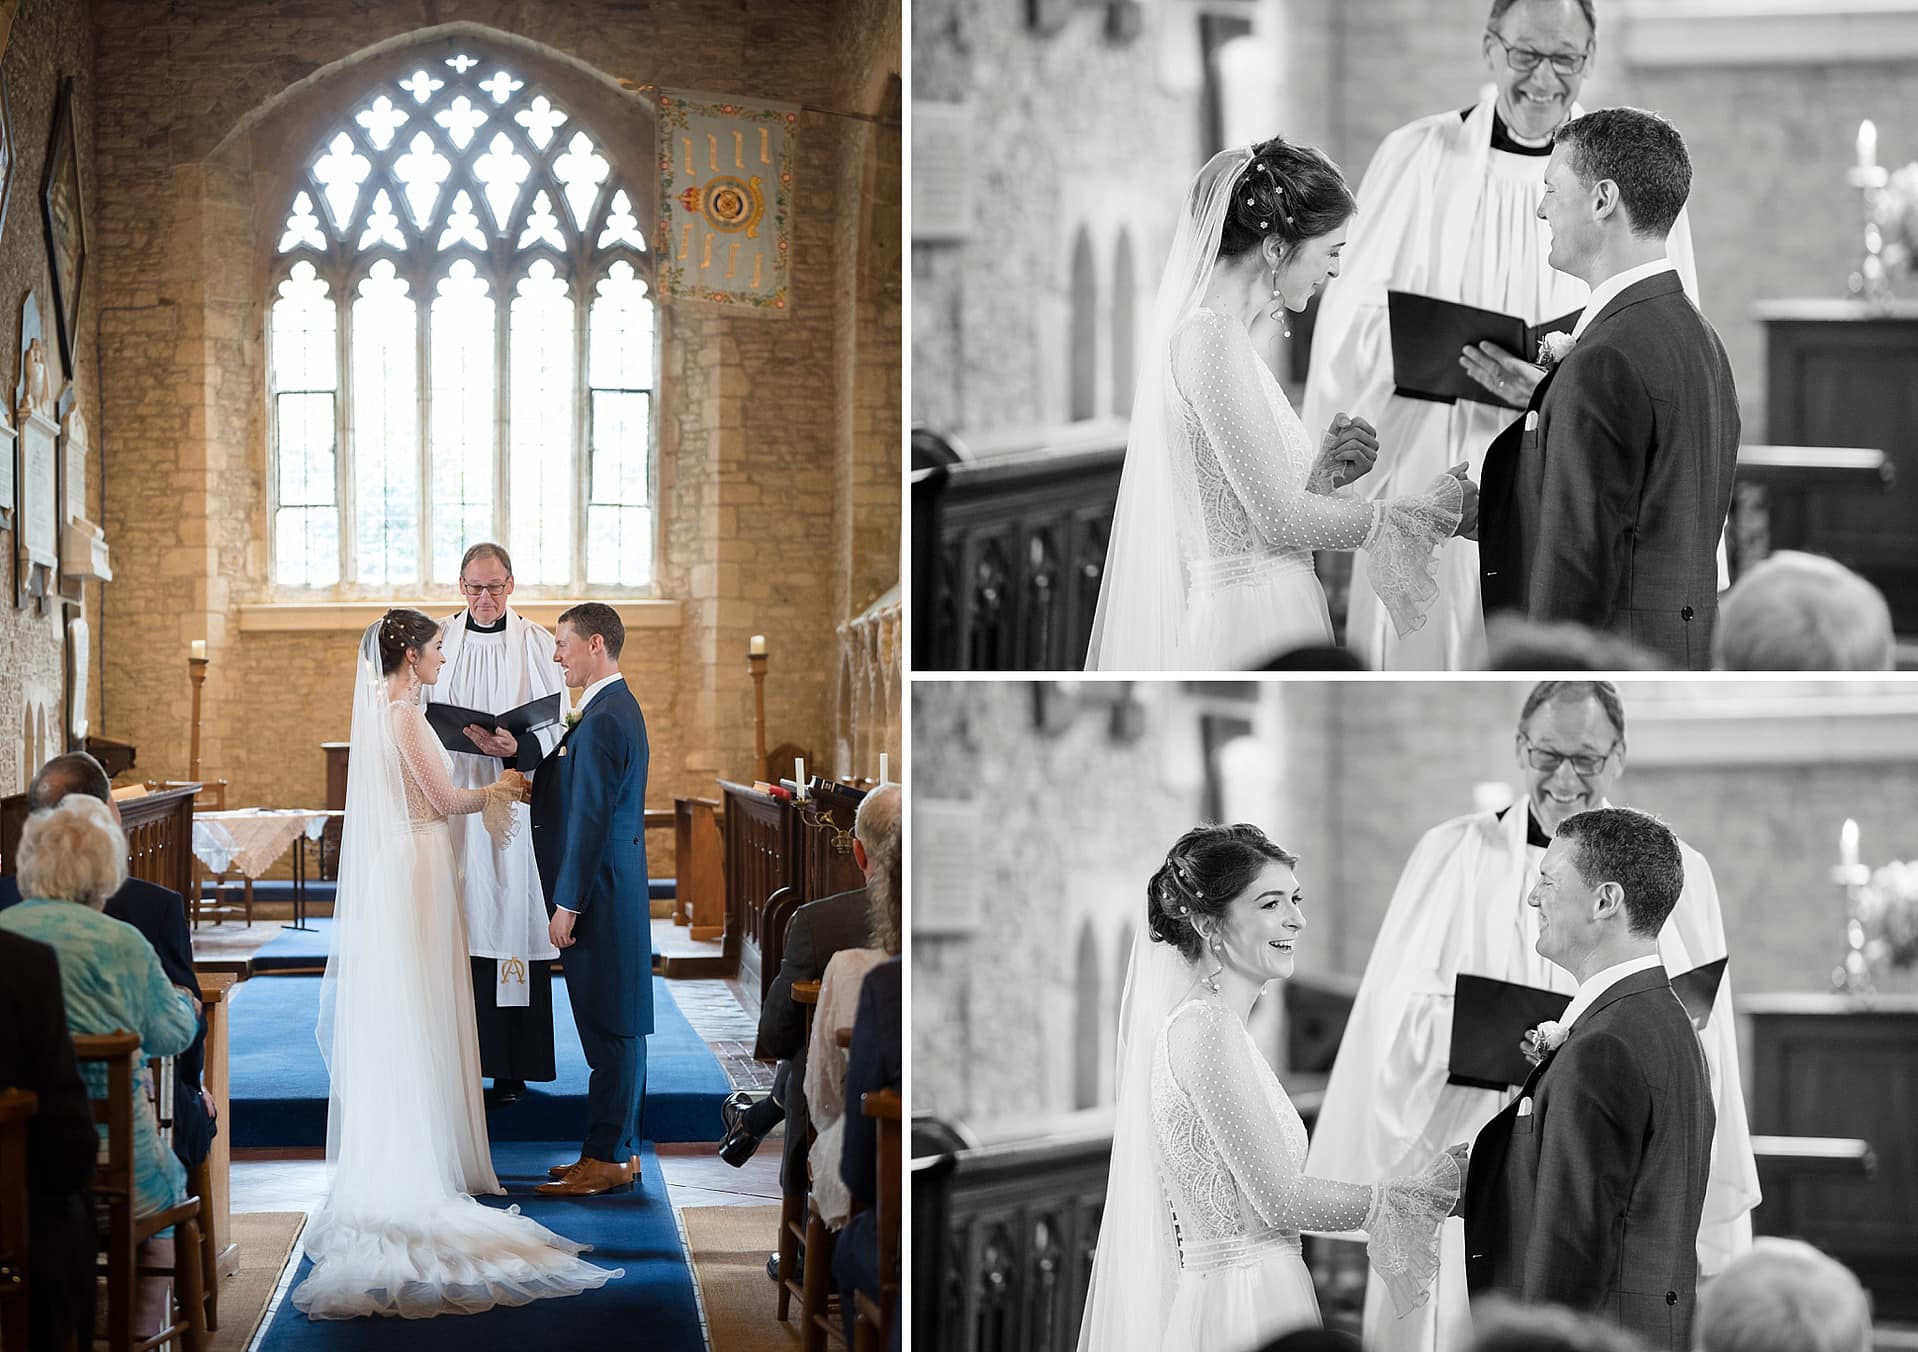 Bride and groom making their marriage vows at Courteenhall church